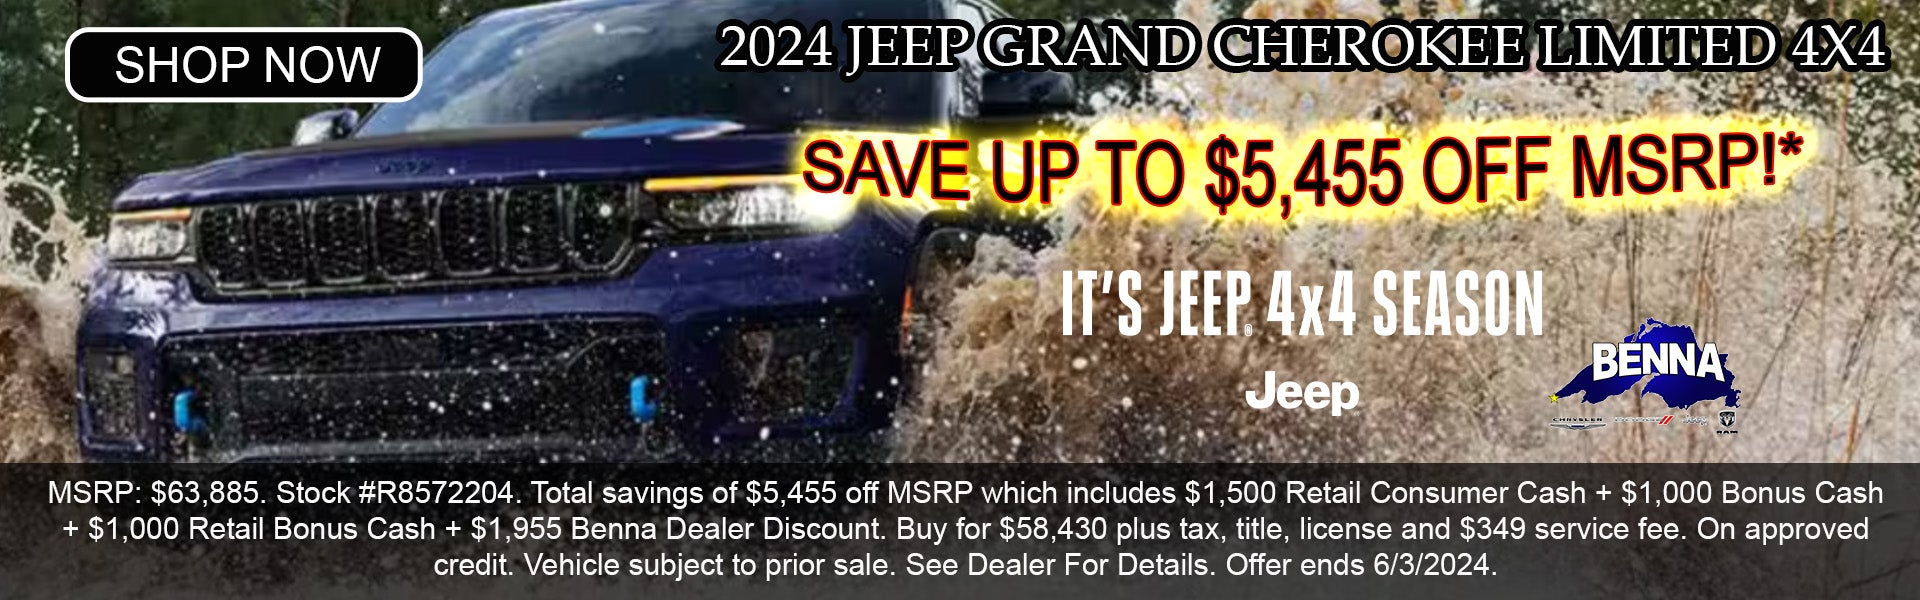 2024 Jeep Grand Cherokee Save Up To $5,455